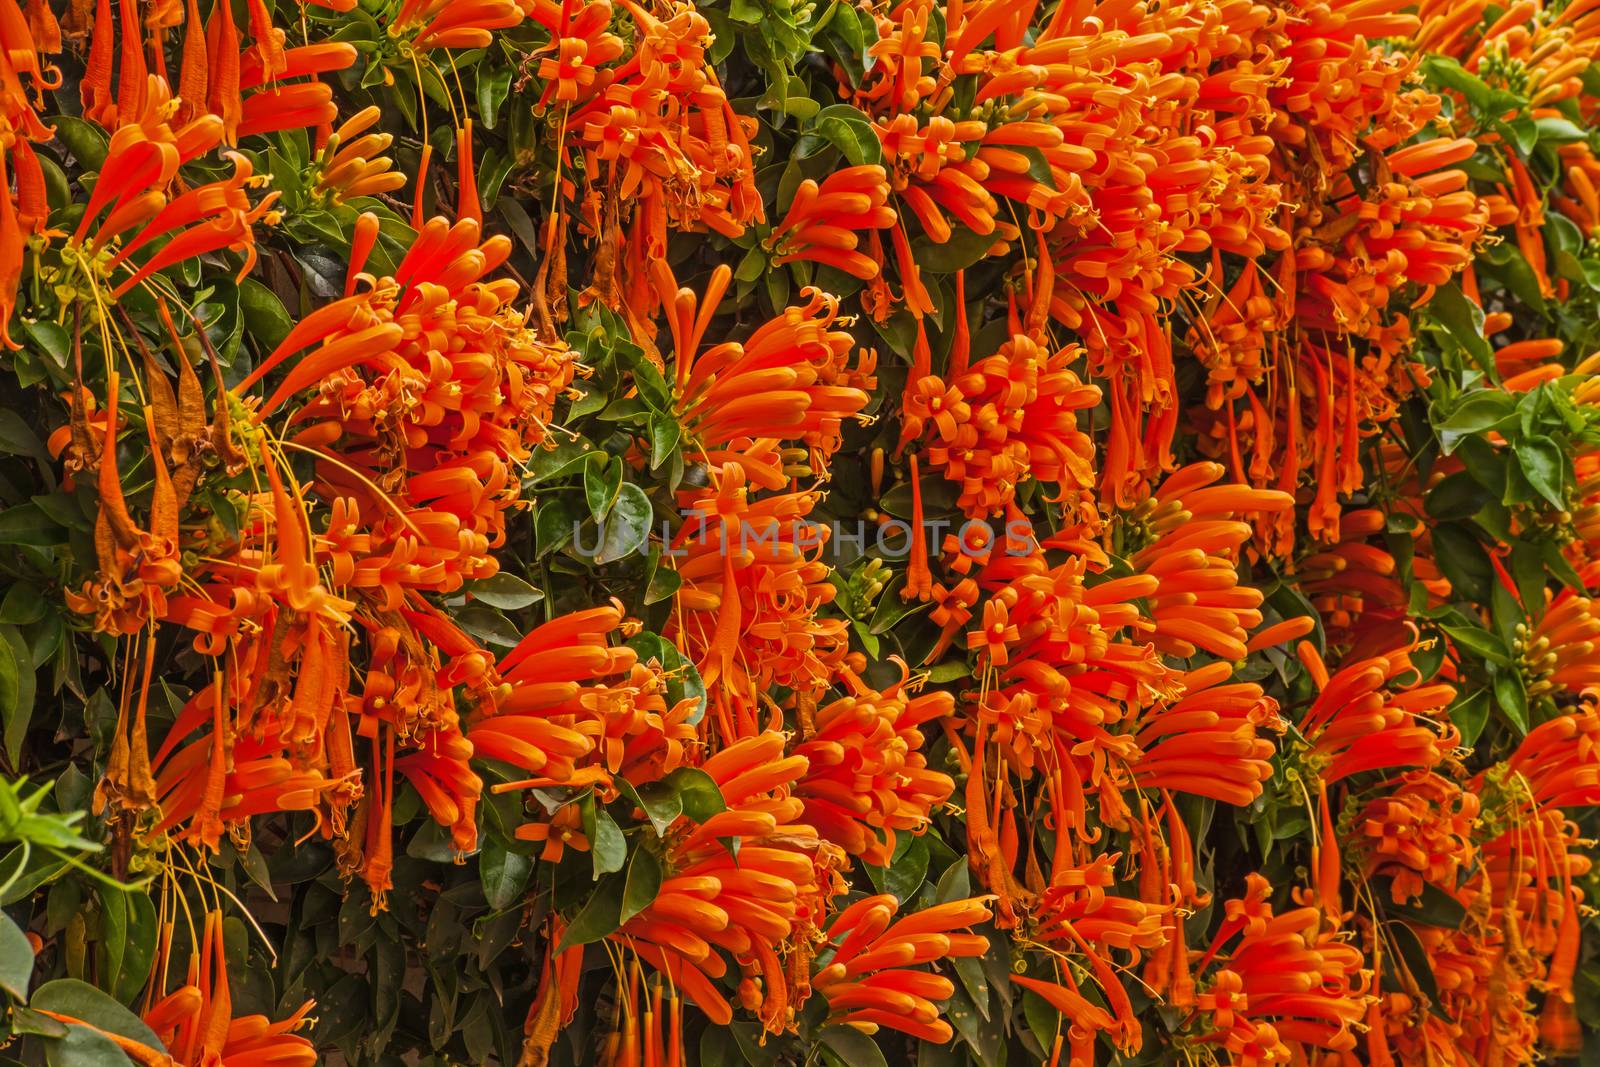 A wall of bright orange flowers 3 by kobus_peche